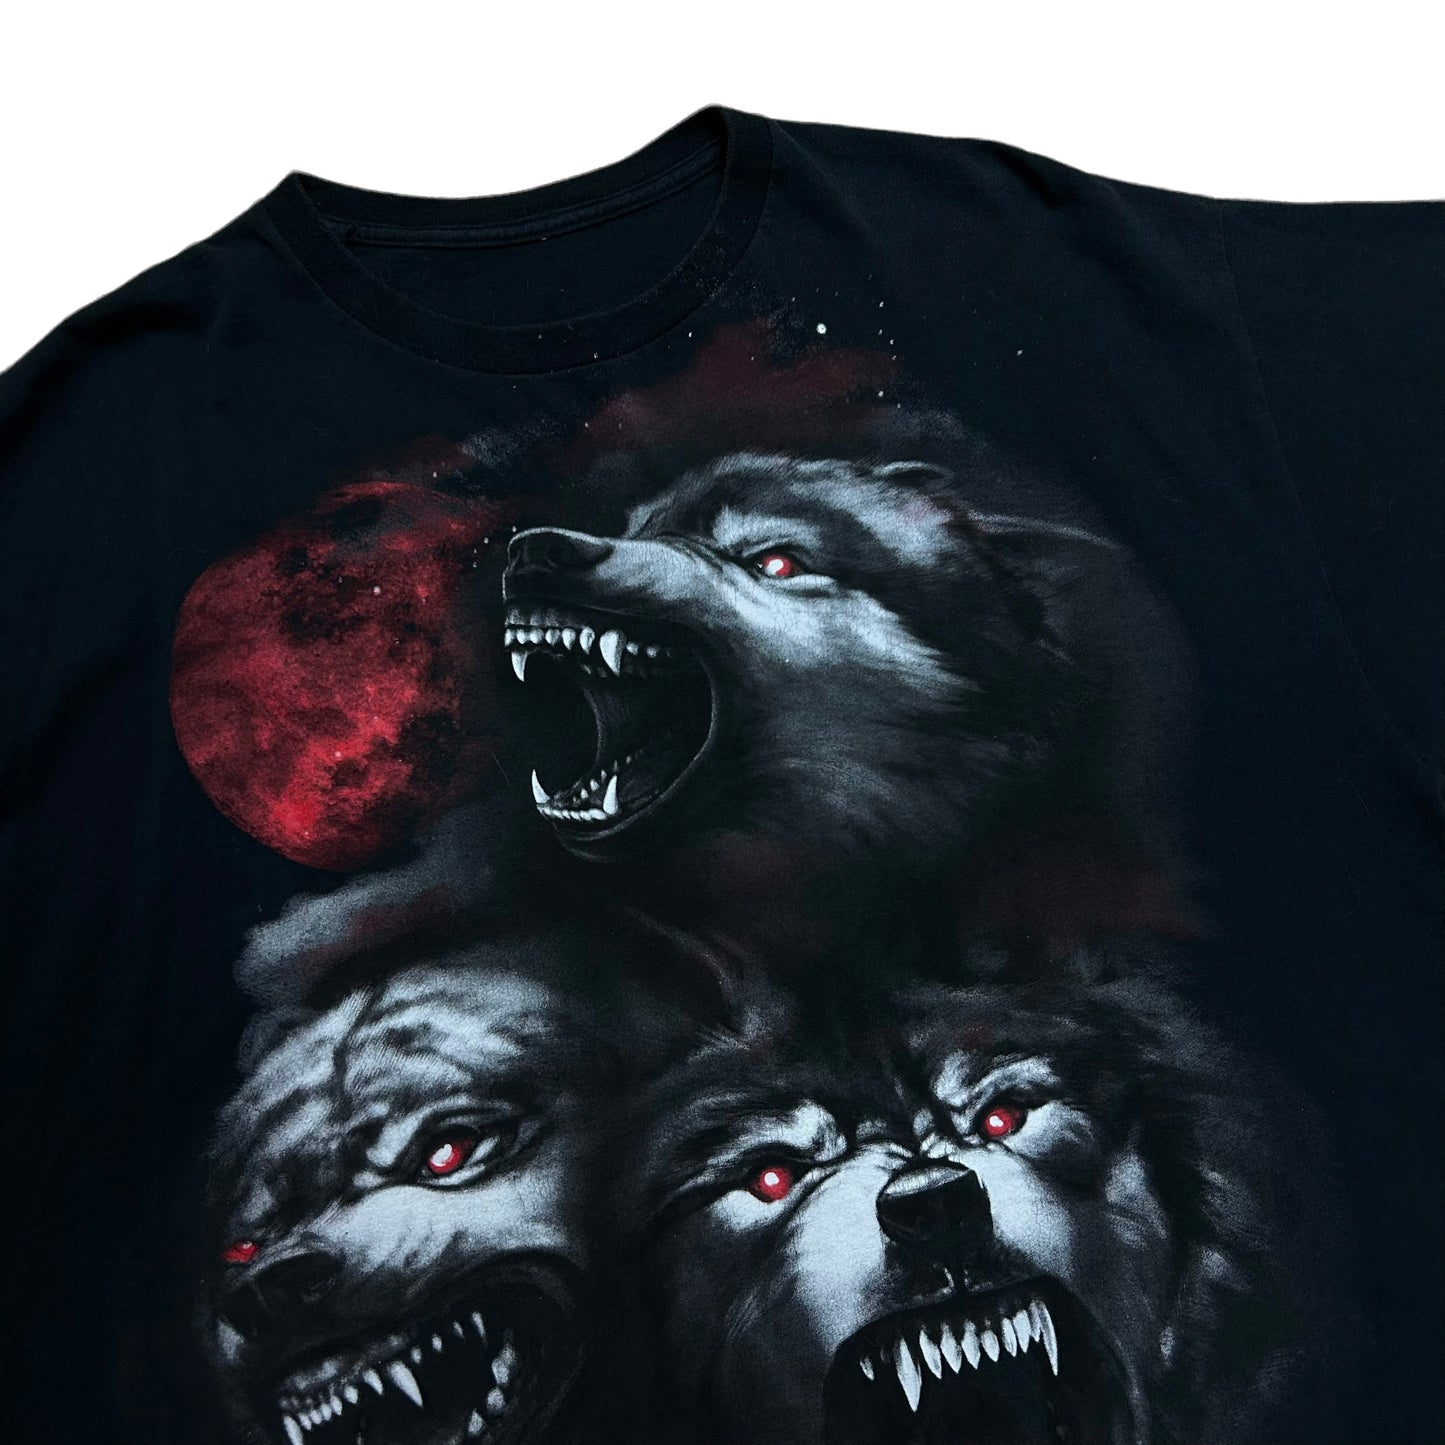 Y2K Blood Moon/Wolves Black Graphic T-Shirt - Size XL